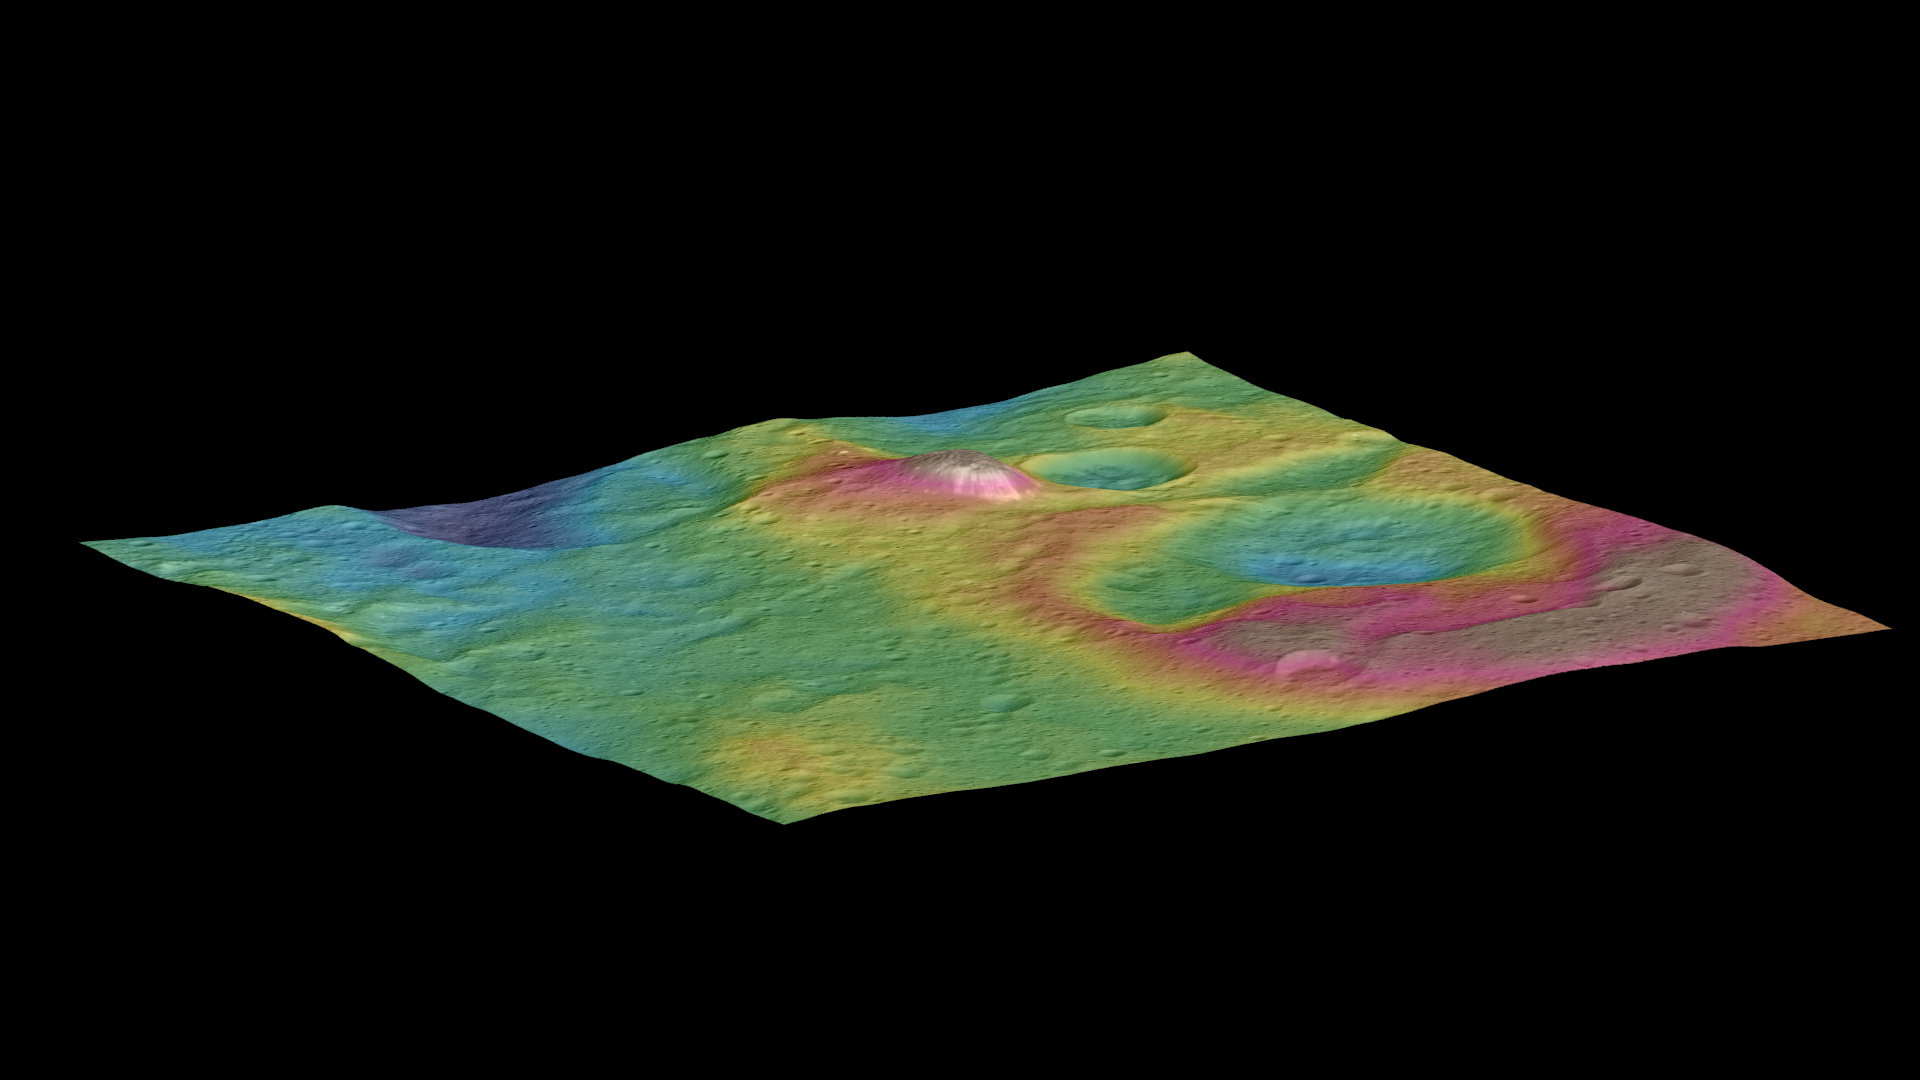 From NASA/JPL: "This view, made using images taken by NASA's Dawn spacecraft, features a tall conical mountain on Ceres. Elevations span a range of about 5 miles (8 kilometers) from the lowest places in this region to the highest terrains. Blue represents the lowest elevation, and brown is the highest. The white streaks seen running down the side of the mountain are especially bright parts of the surface." Image Credit: NASA/JPL-Caltech/UCLA/MPS/DLR/IDA/PSI